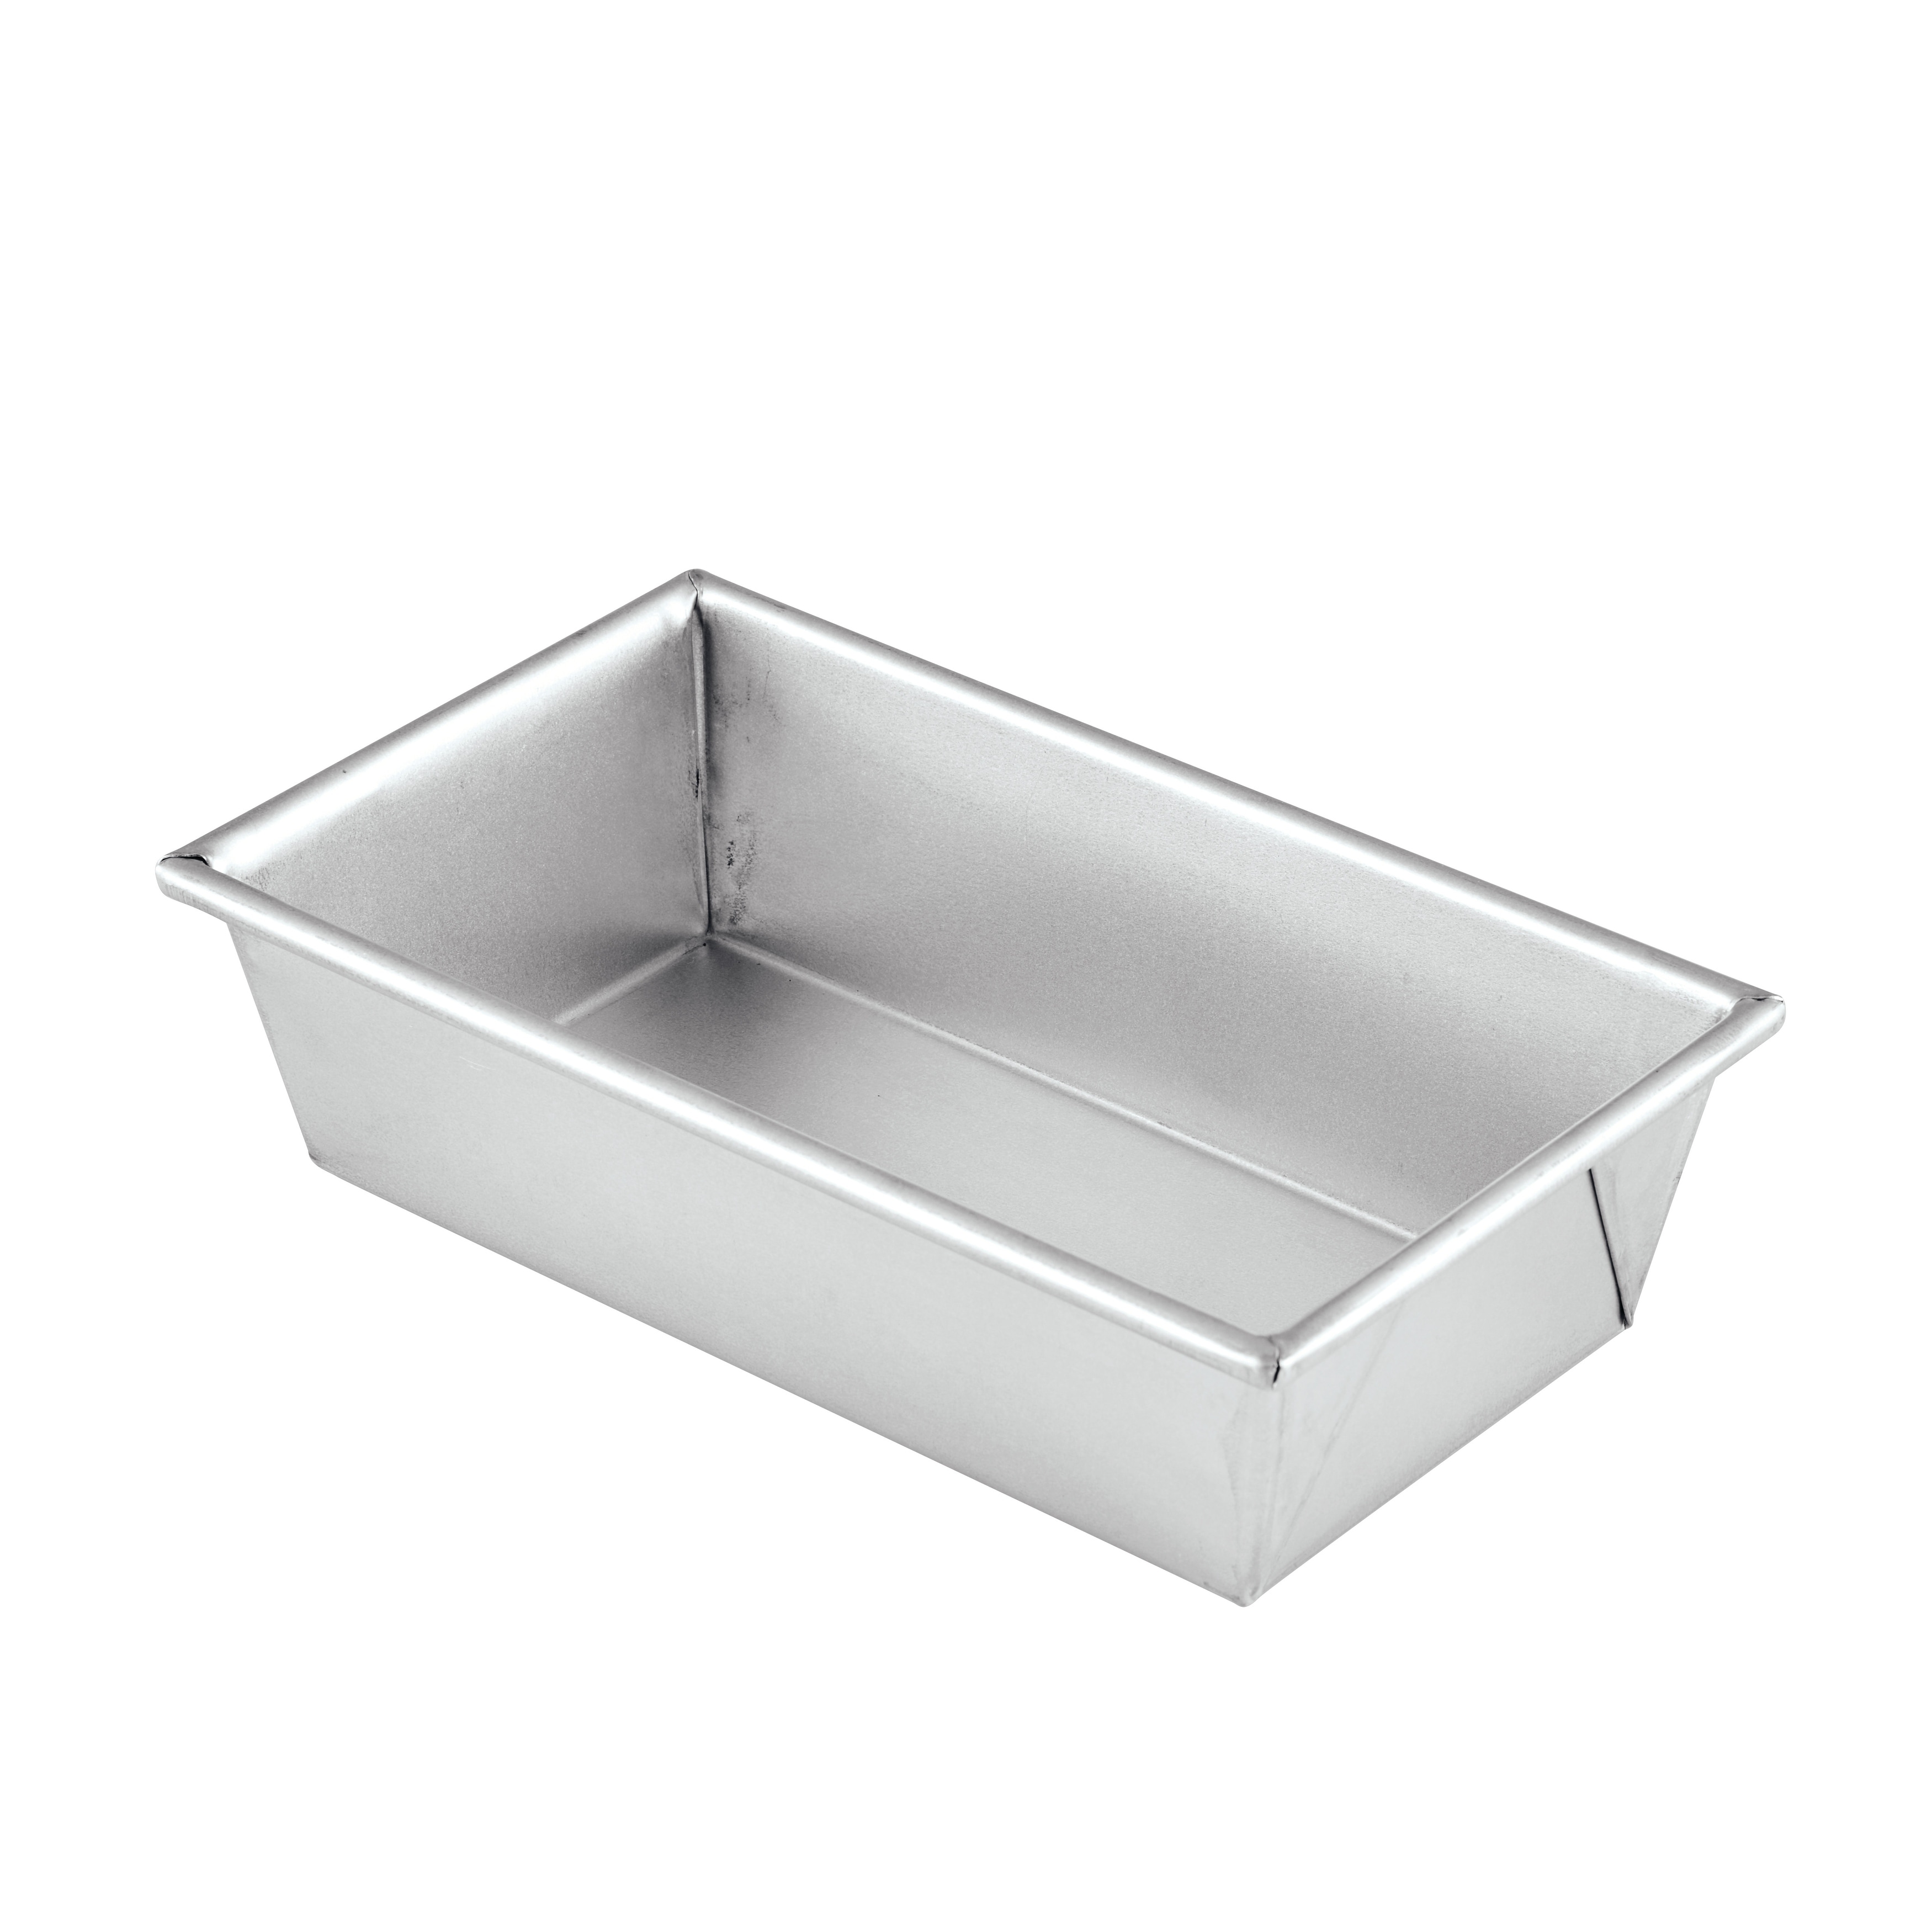 https://ak1.ostkcdn.com/images/products/is/images/direct/fbe617cf0c327f562e7f295c5d5a6e14bd486854/Anolon-Pro-Bake-Bakeware-Aluminized-Steel-Loaf-Pan%2C-9-Inch-x-5-Inch%2C-Silver.jpg